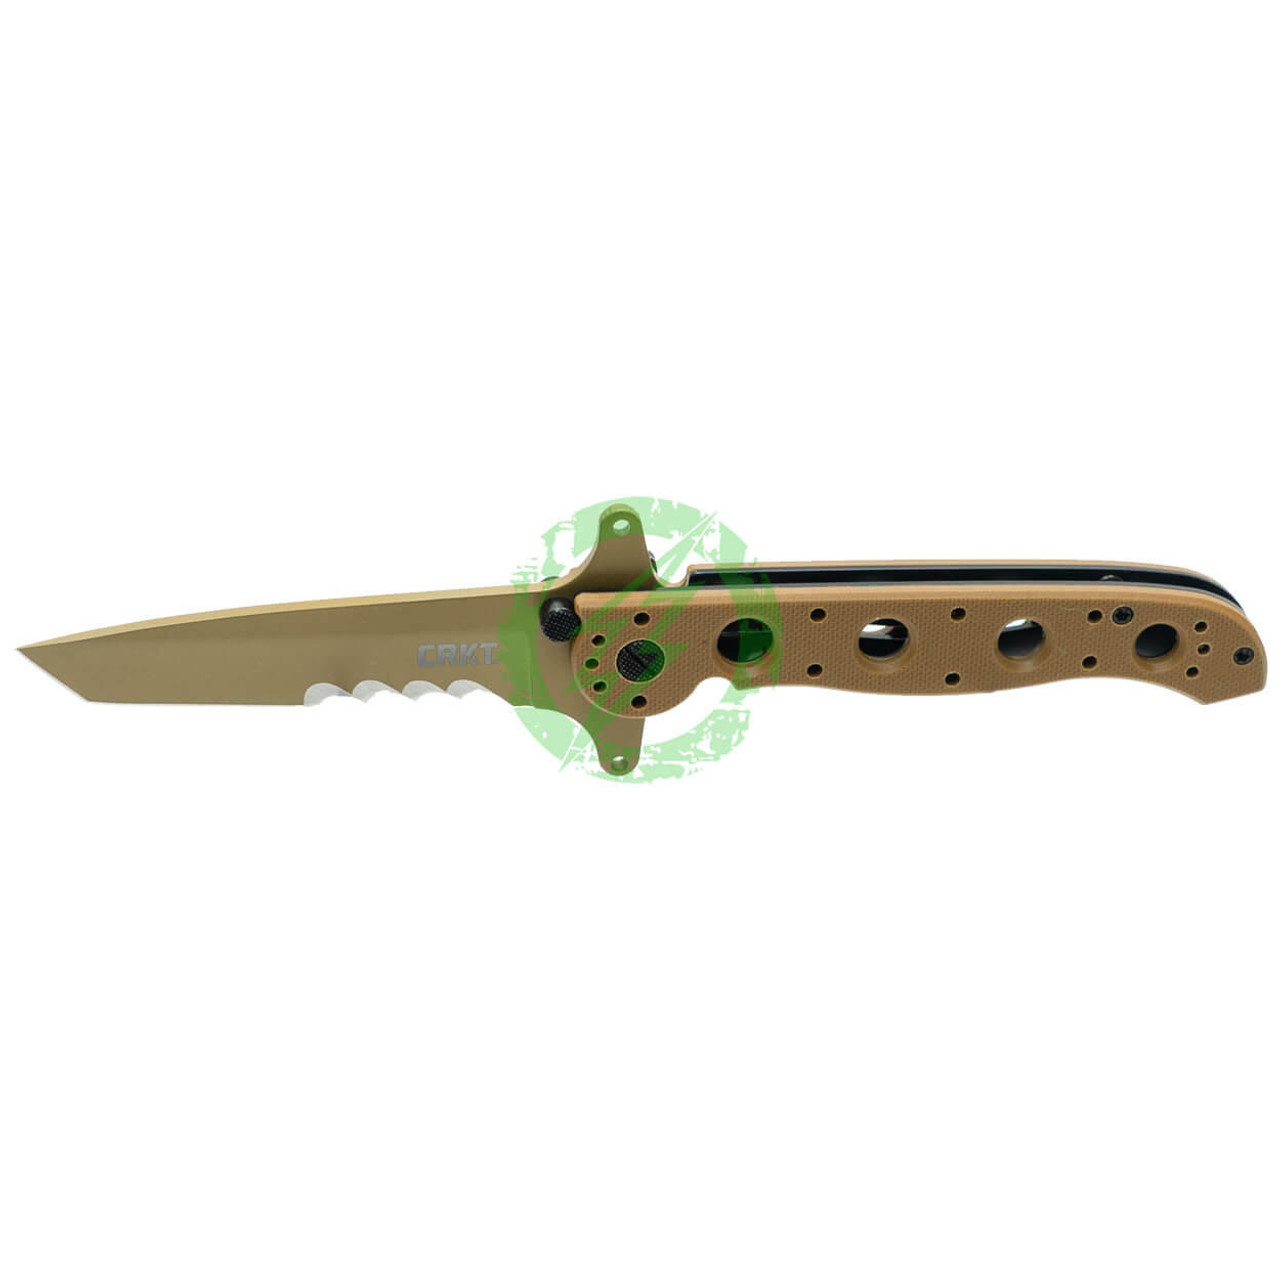 CRKT (Columbia River Knife Tool) CRKT M16-13DSFG Desert with Veff Serrations Folding Blade Knife with 1.4116 Titanium Nitride Blade & G10 Handle 